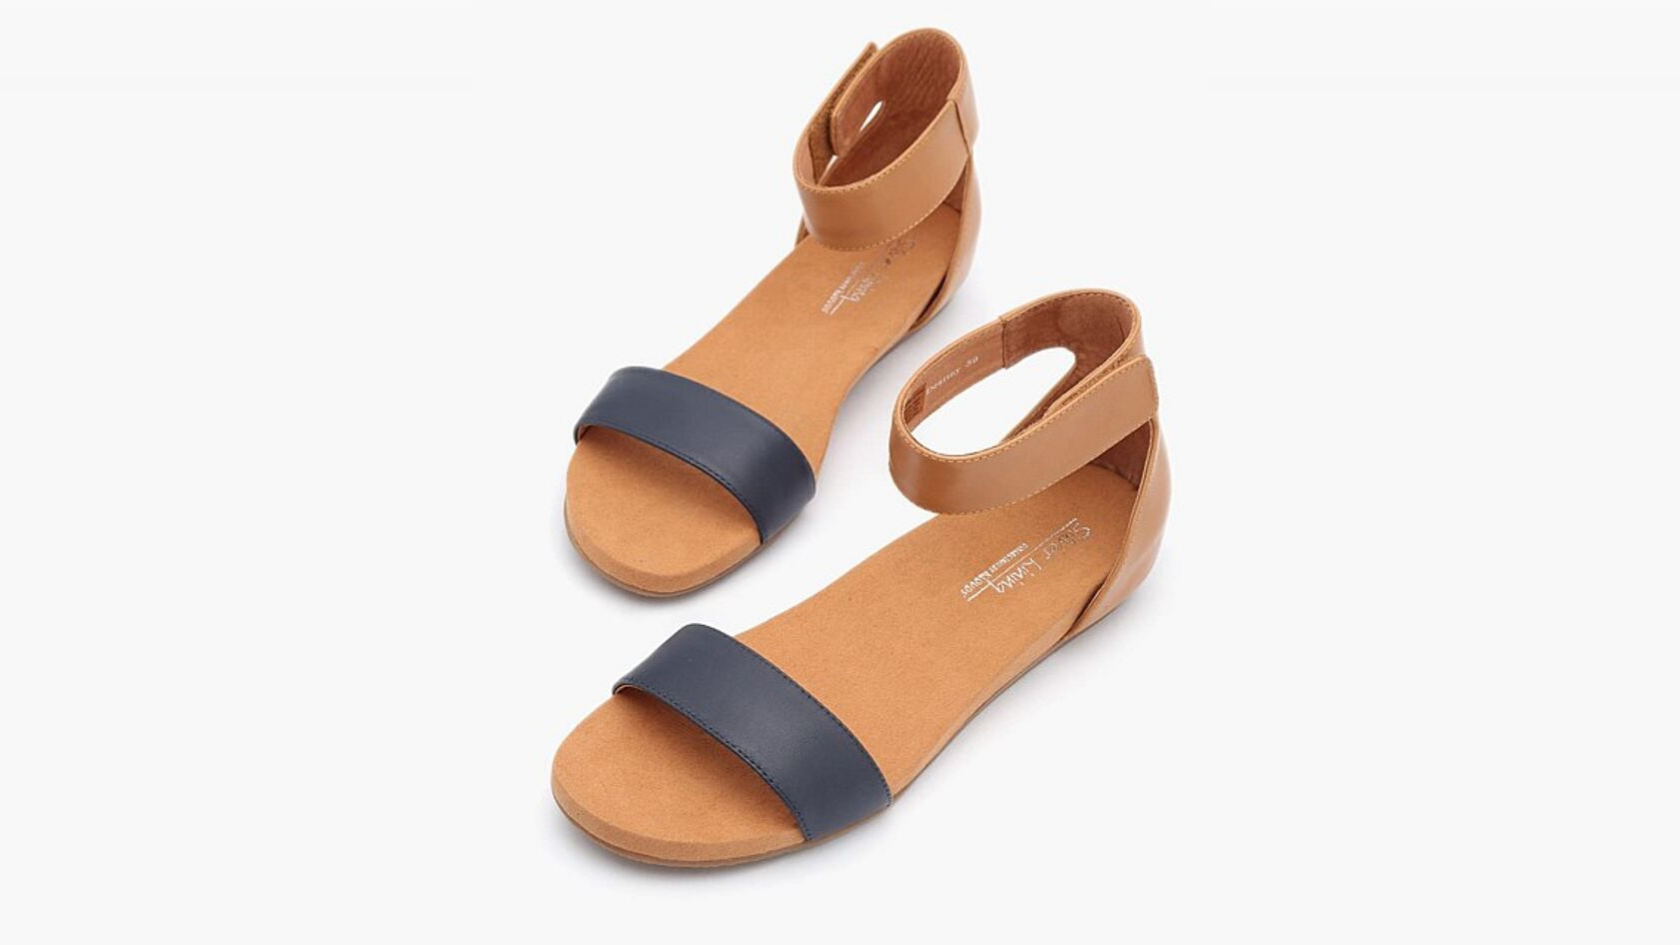 Arch support sandal with blue and tan straps.